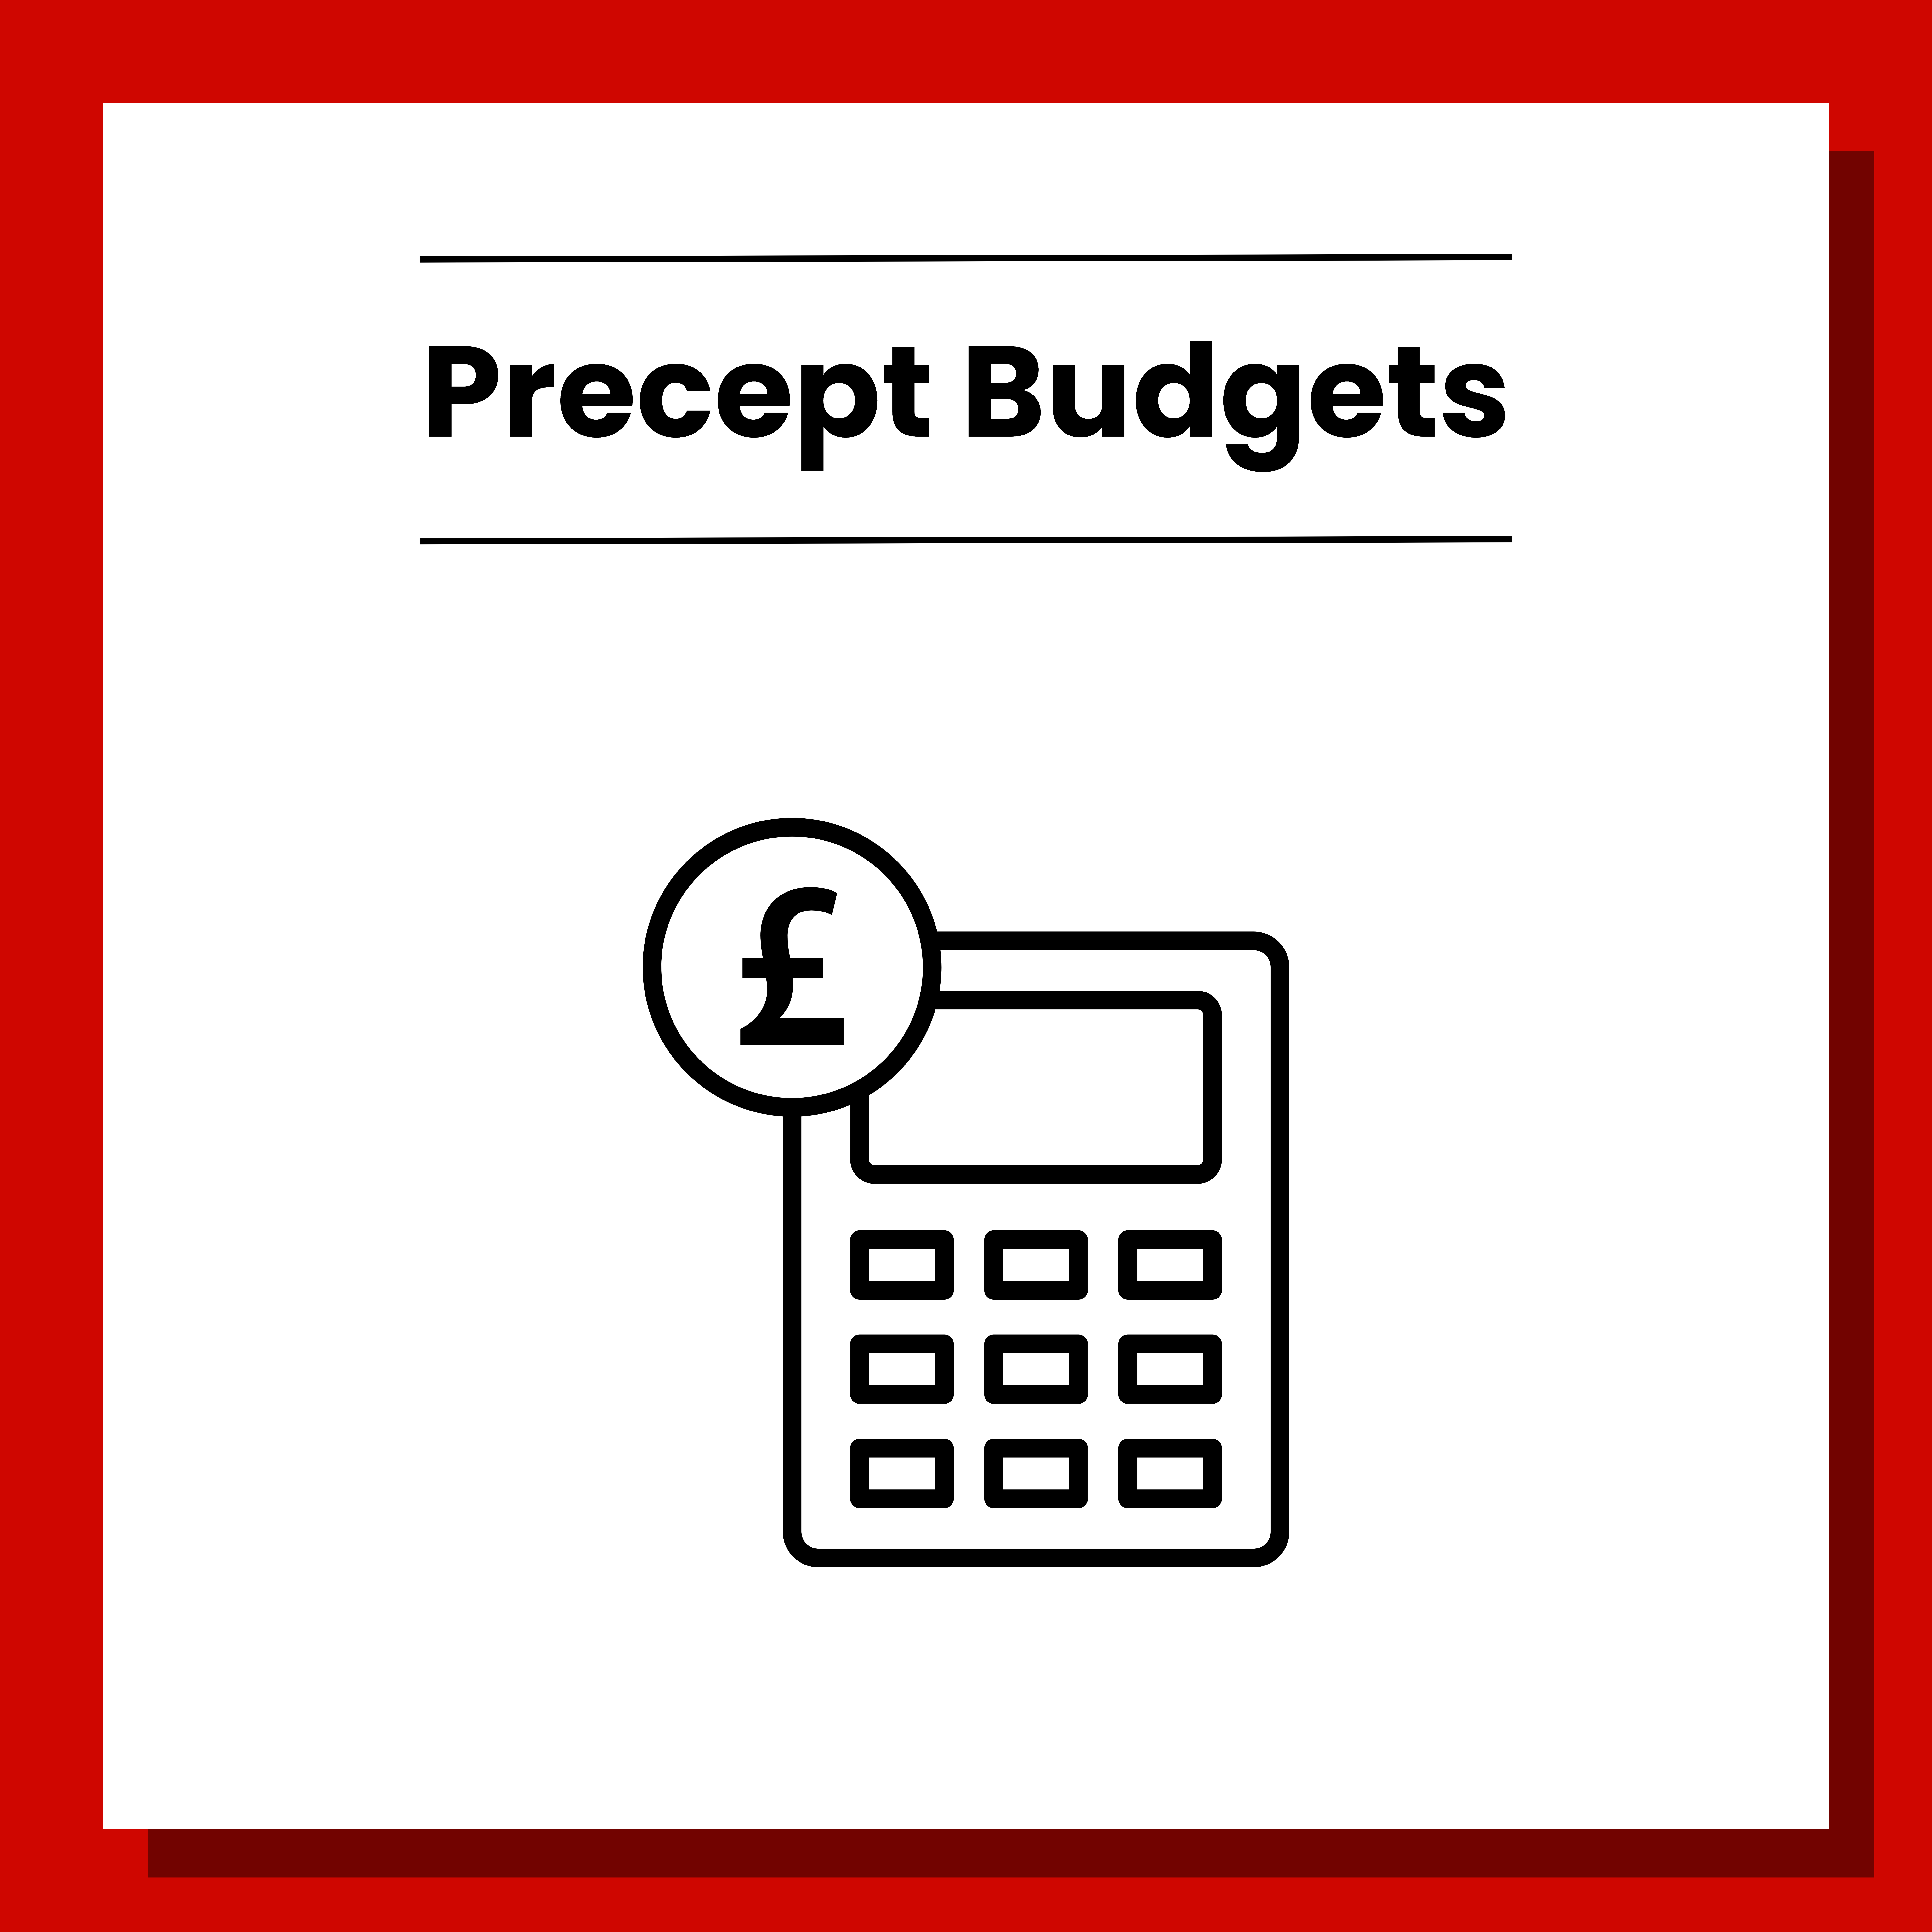 Click here to see the Precept Budgets page.